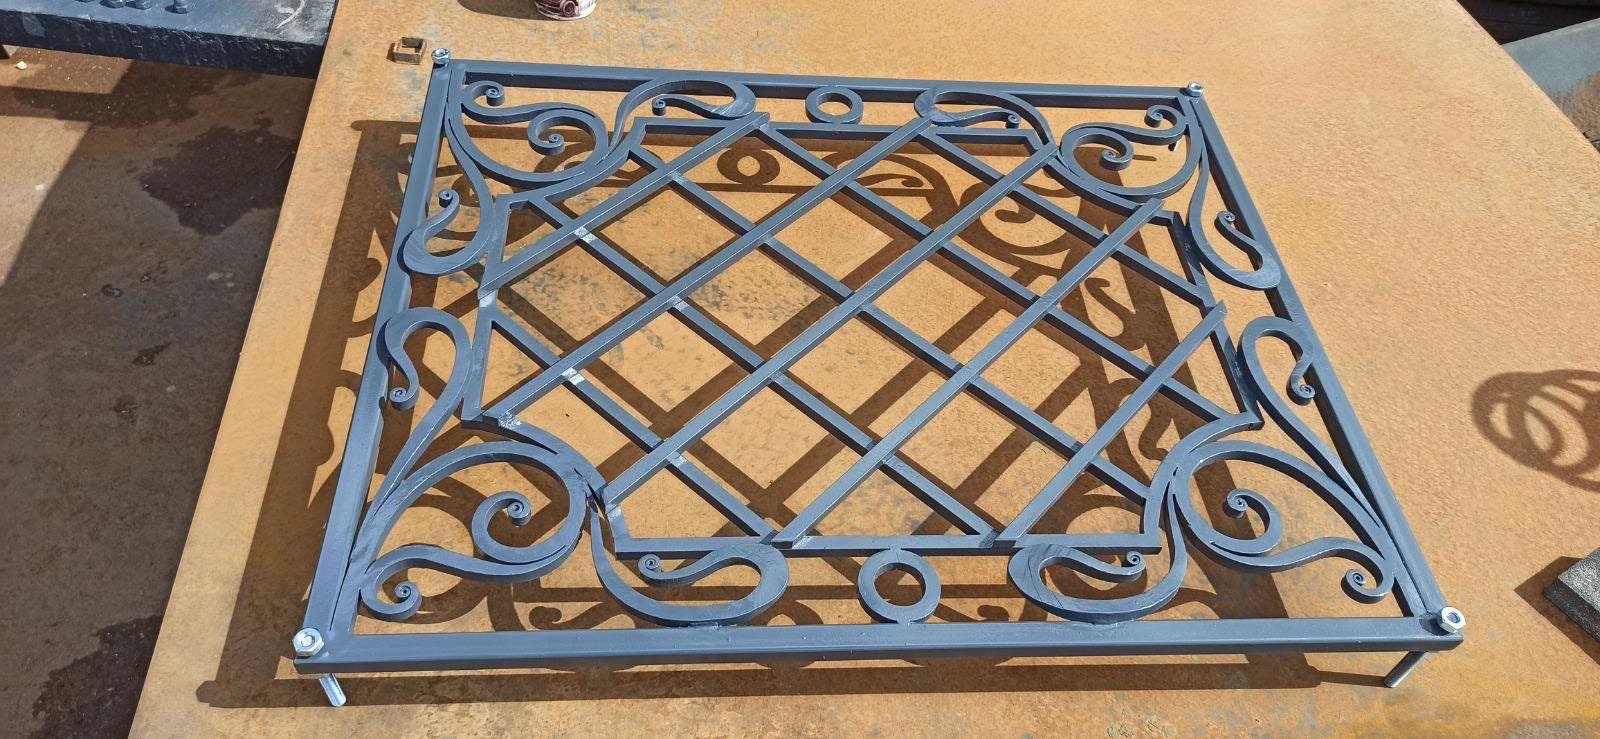 Vent cover, grate, grid, door grille, railing, balcony, air return grille, window grille, anniversary, medieval,air return grate cover